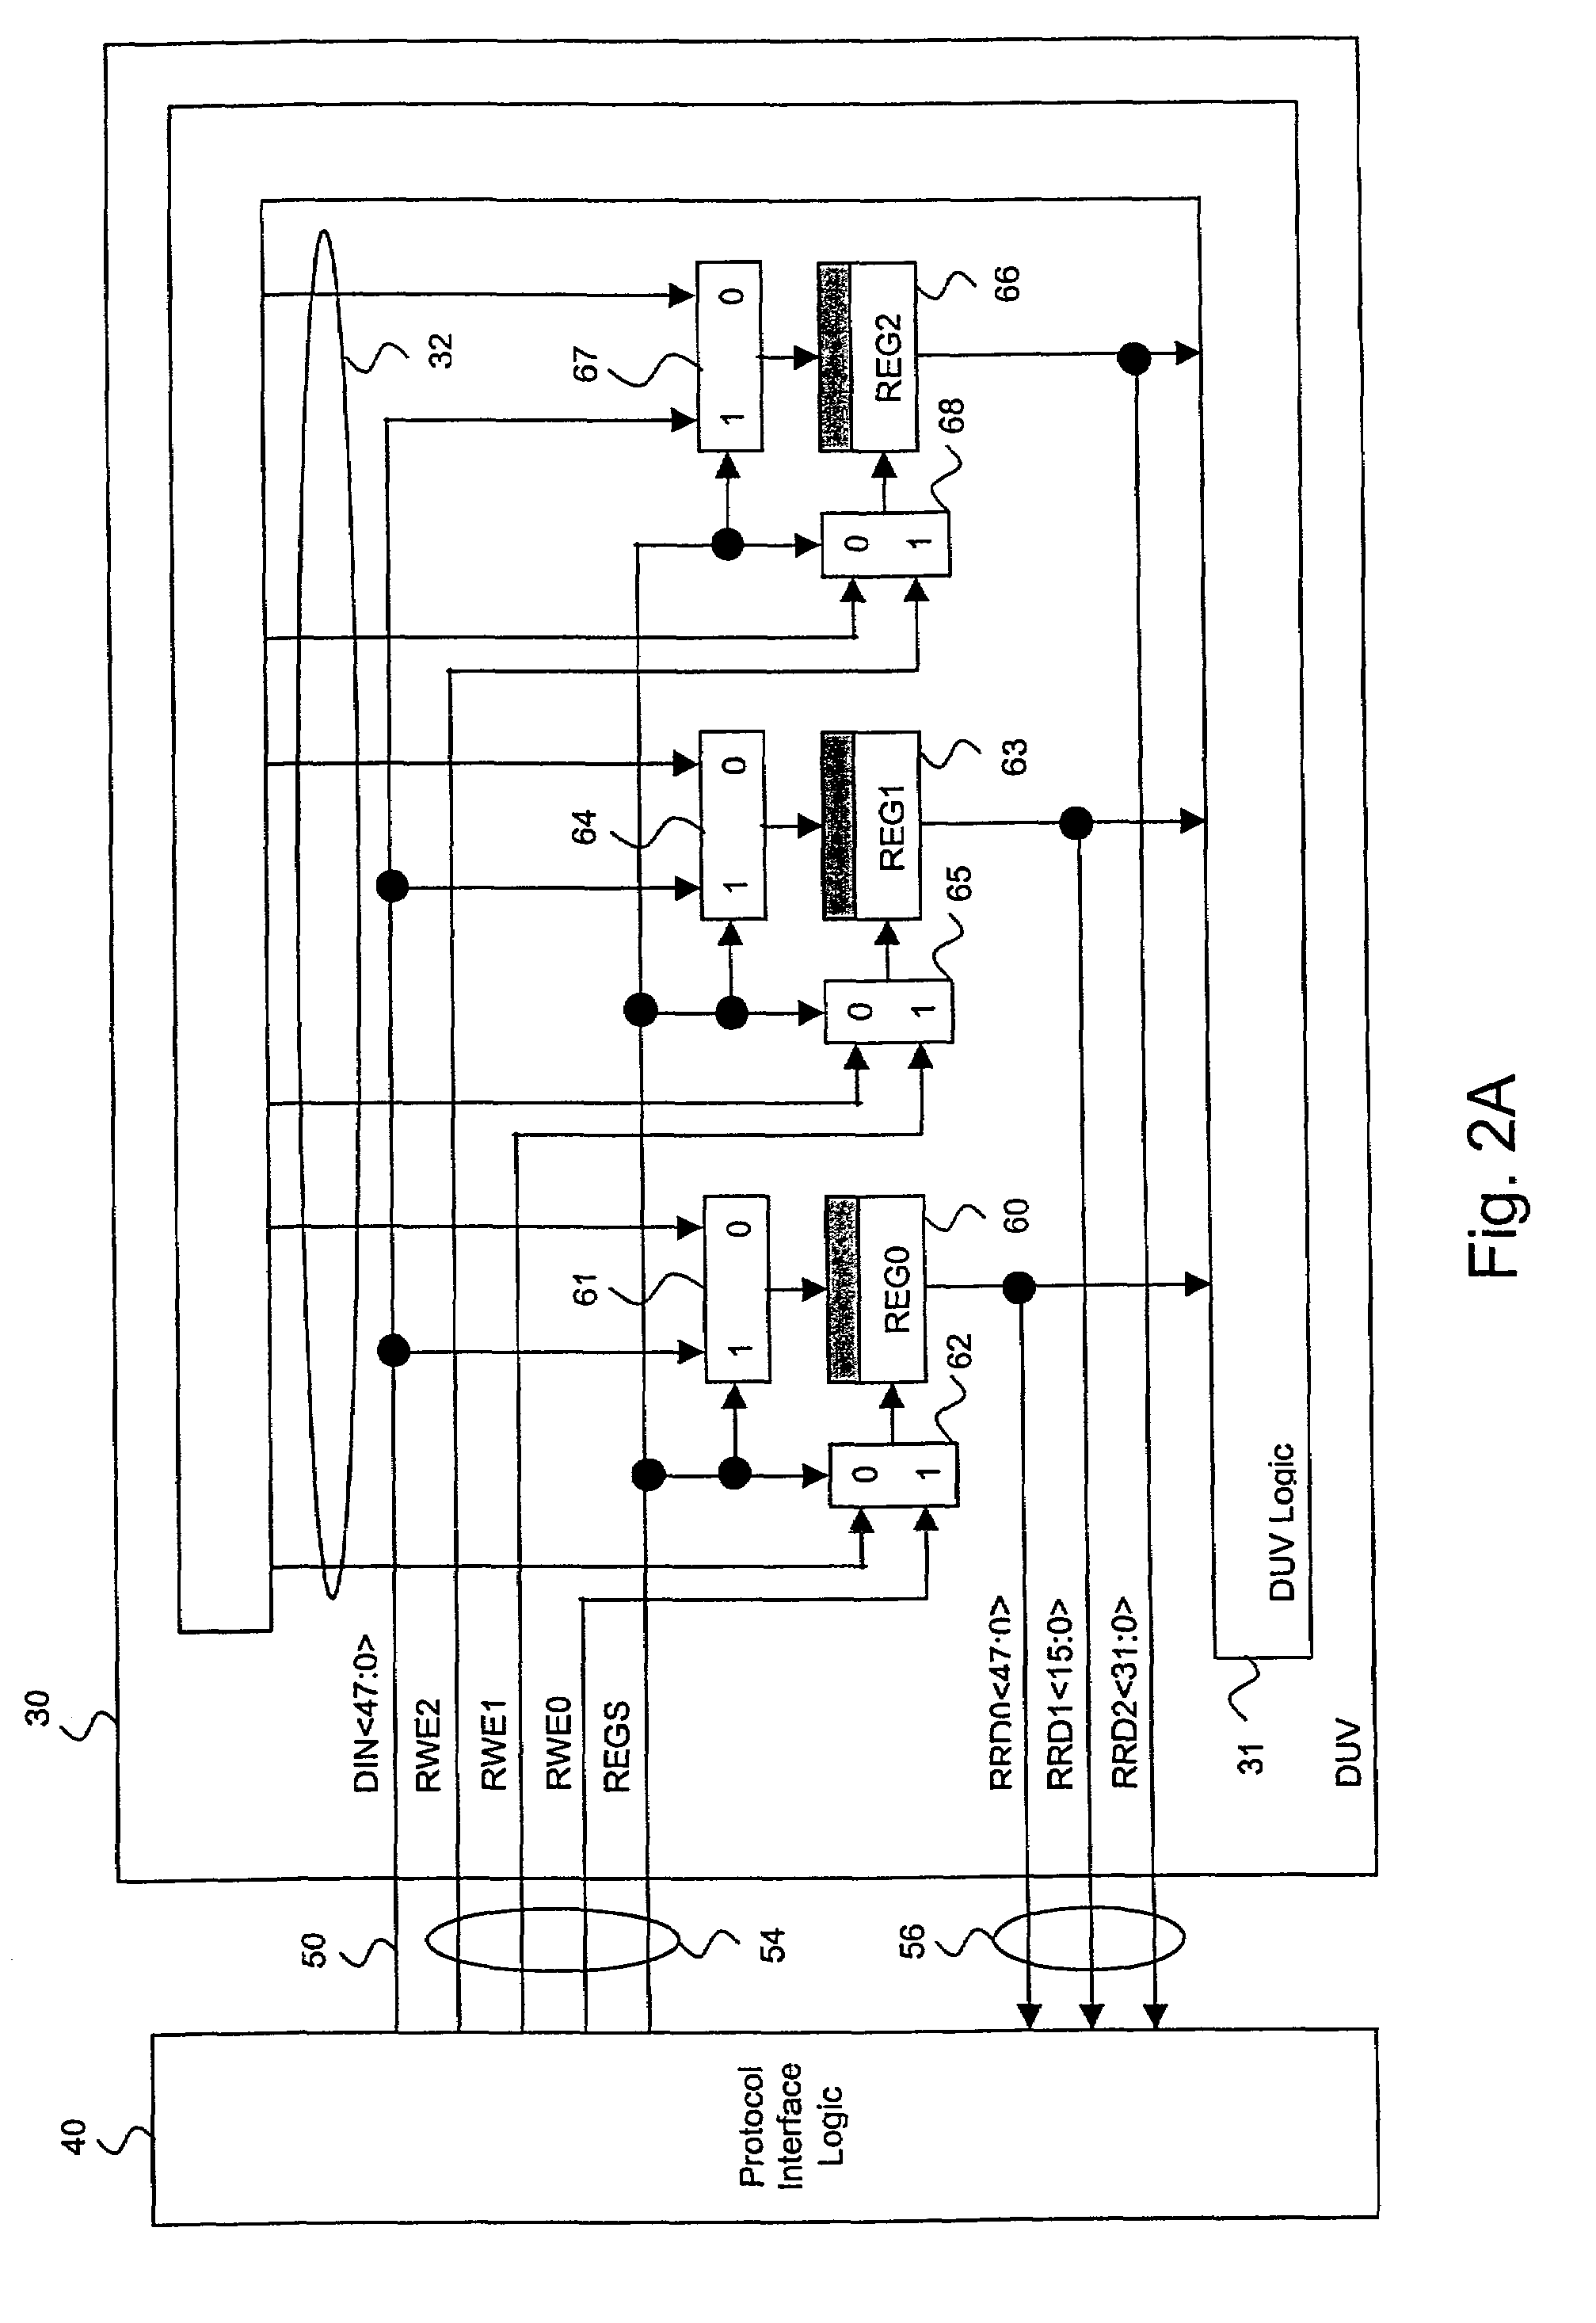 Hardware-assisted design verification system using a packet-based protocol logic synthesized for efficient data loading and unloading